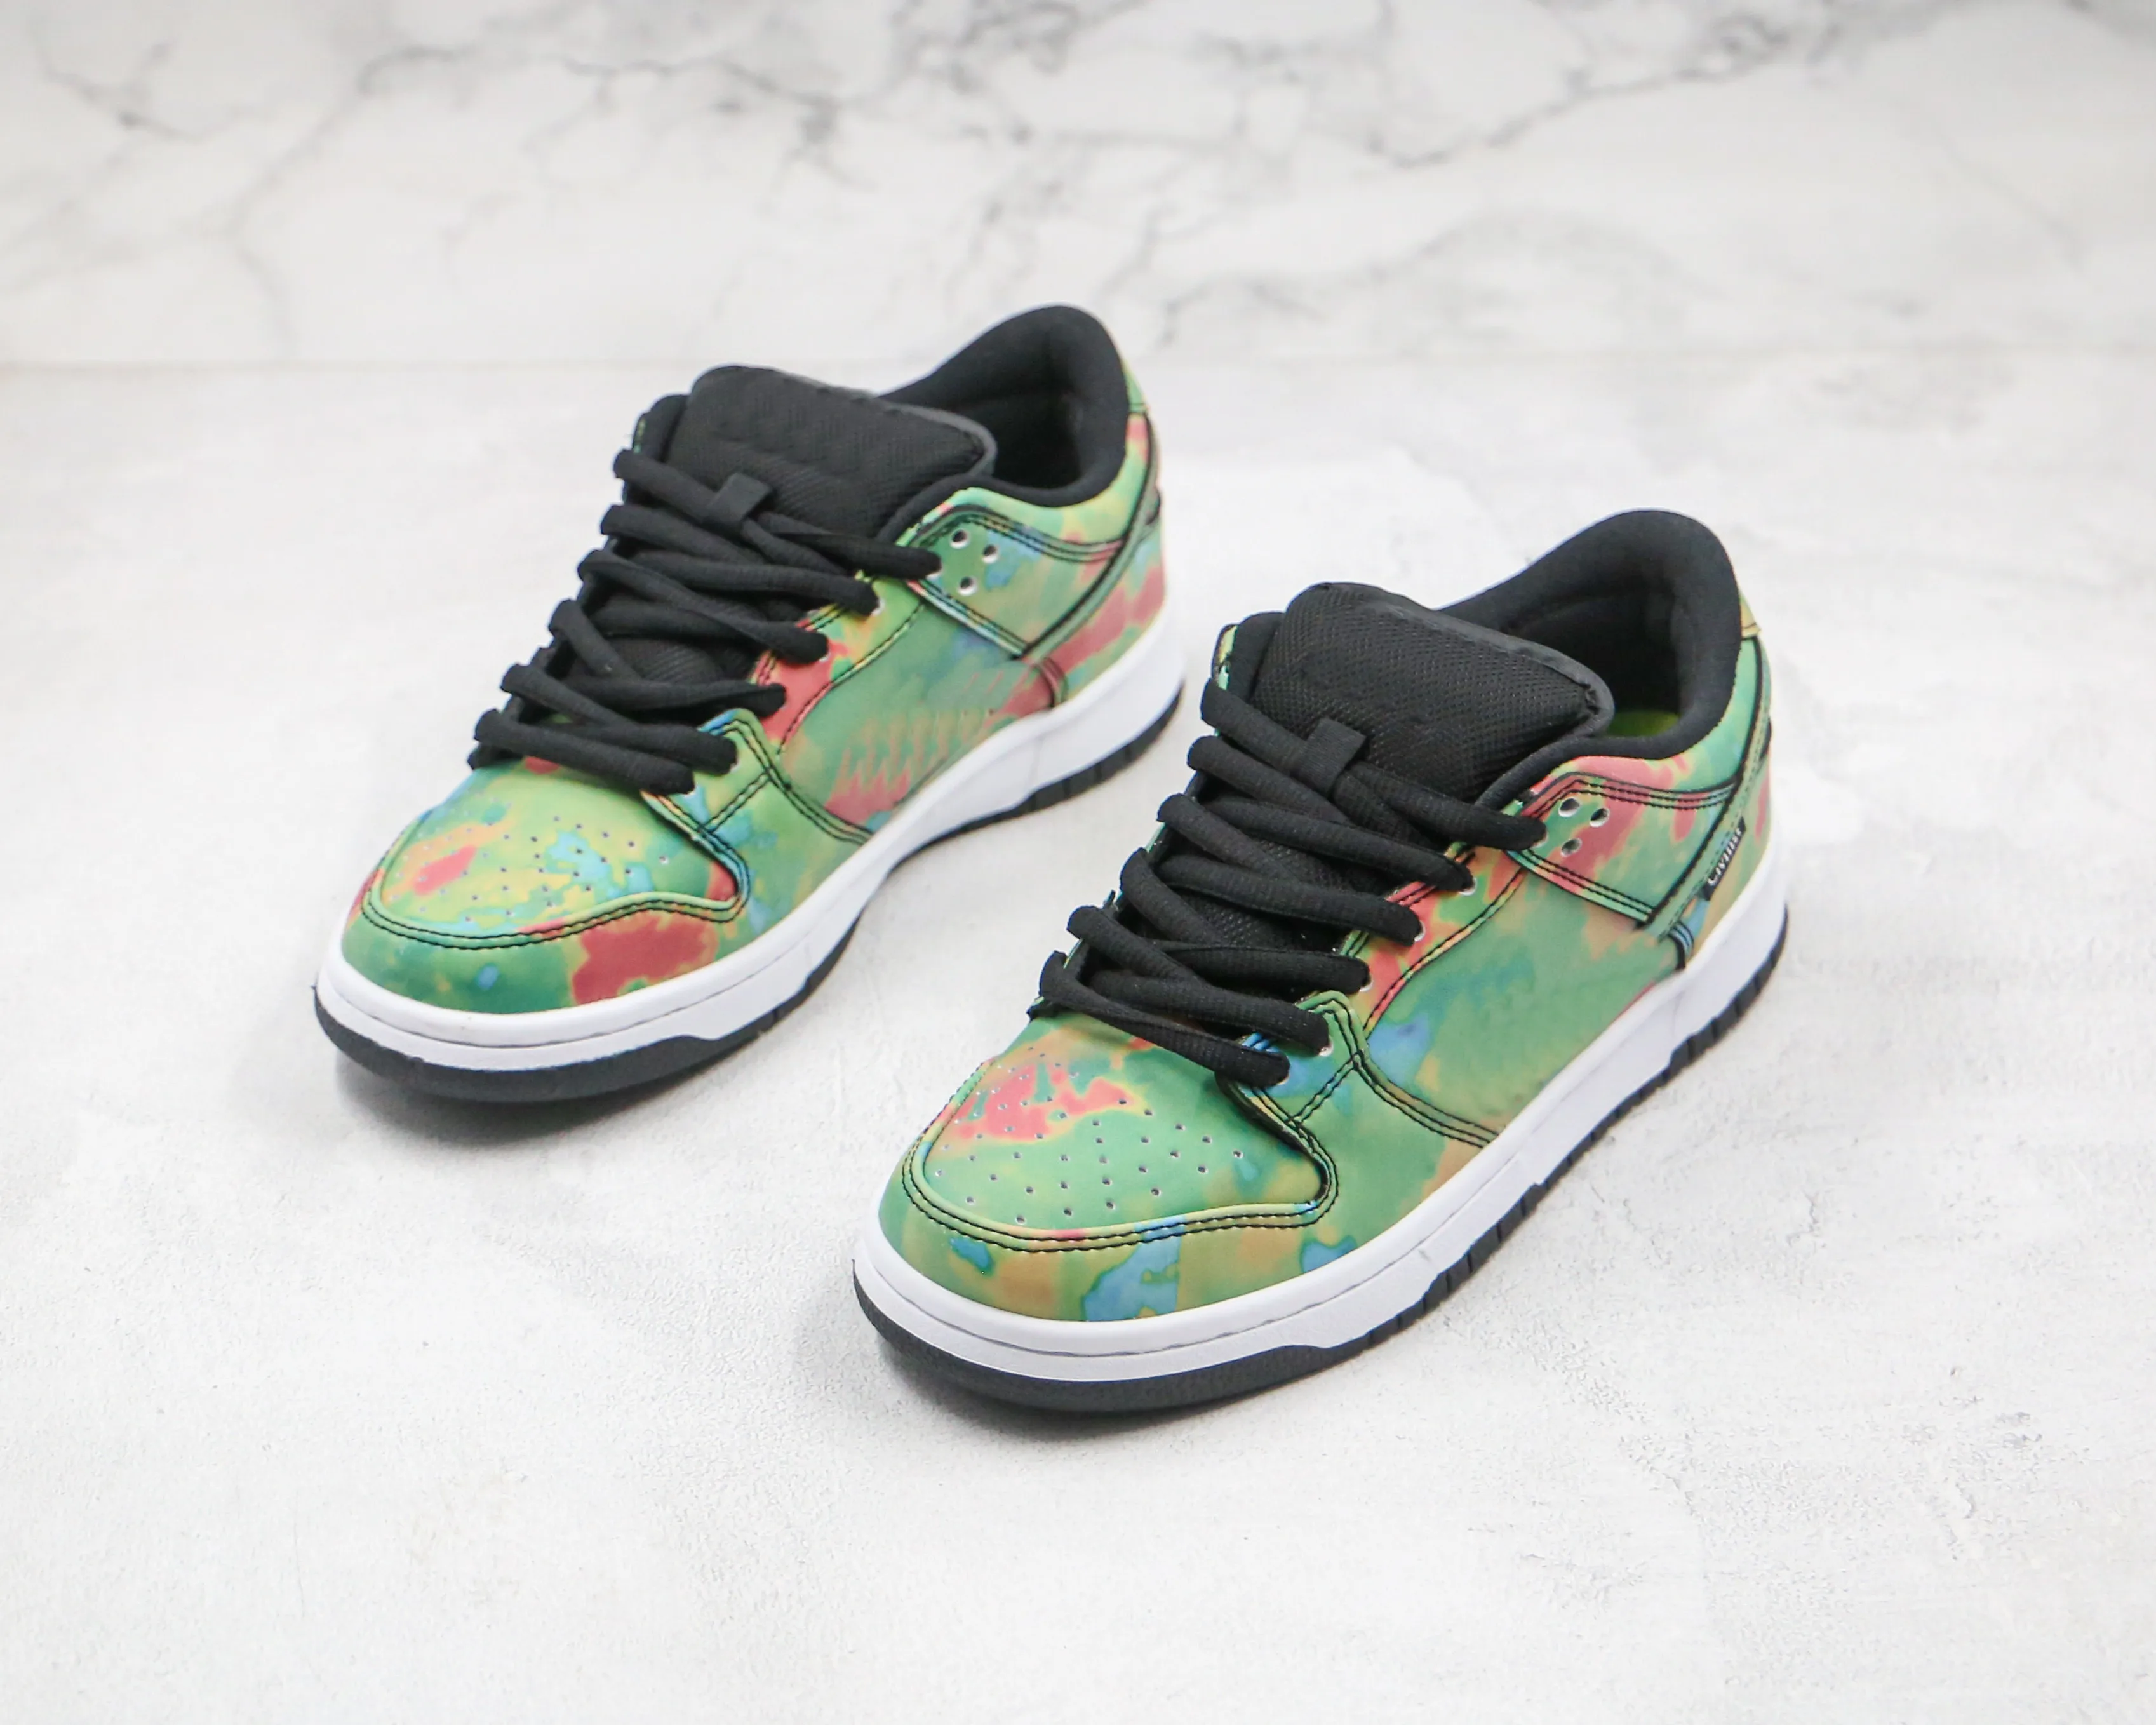 

High Quality Kentucky Syracuse Plum Shadow Travis Scott X Sb Dunks Low Tie Dye White Casual Color changing shoes